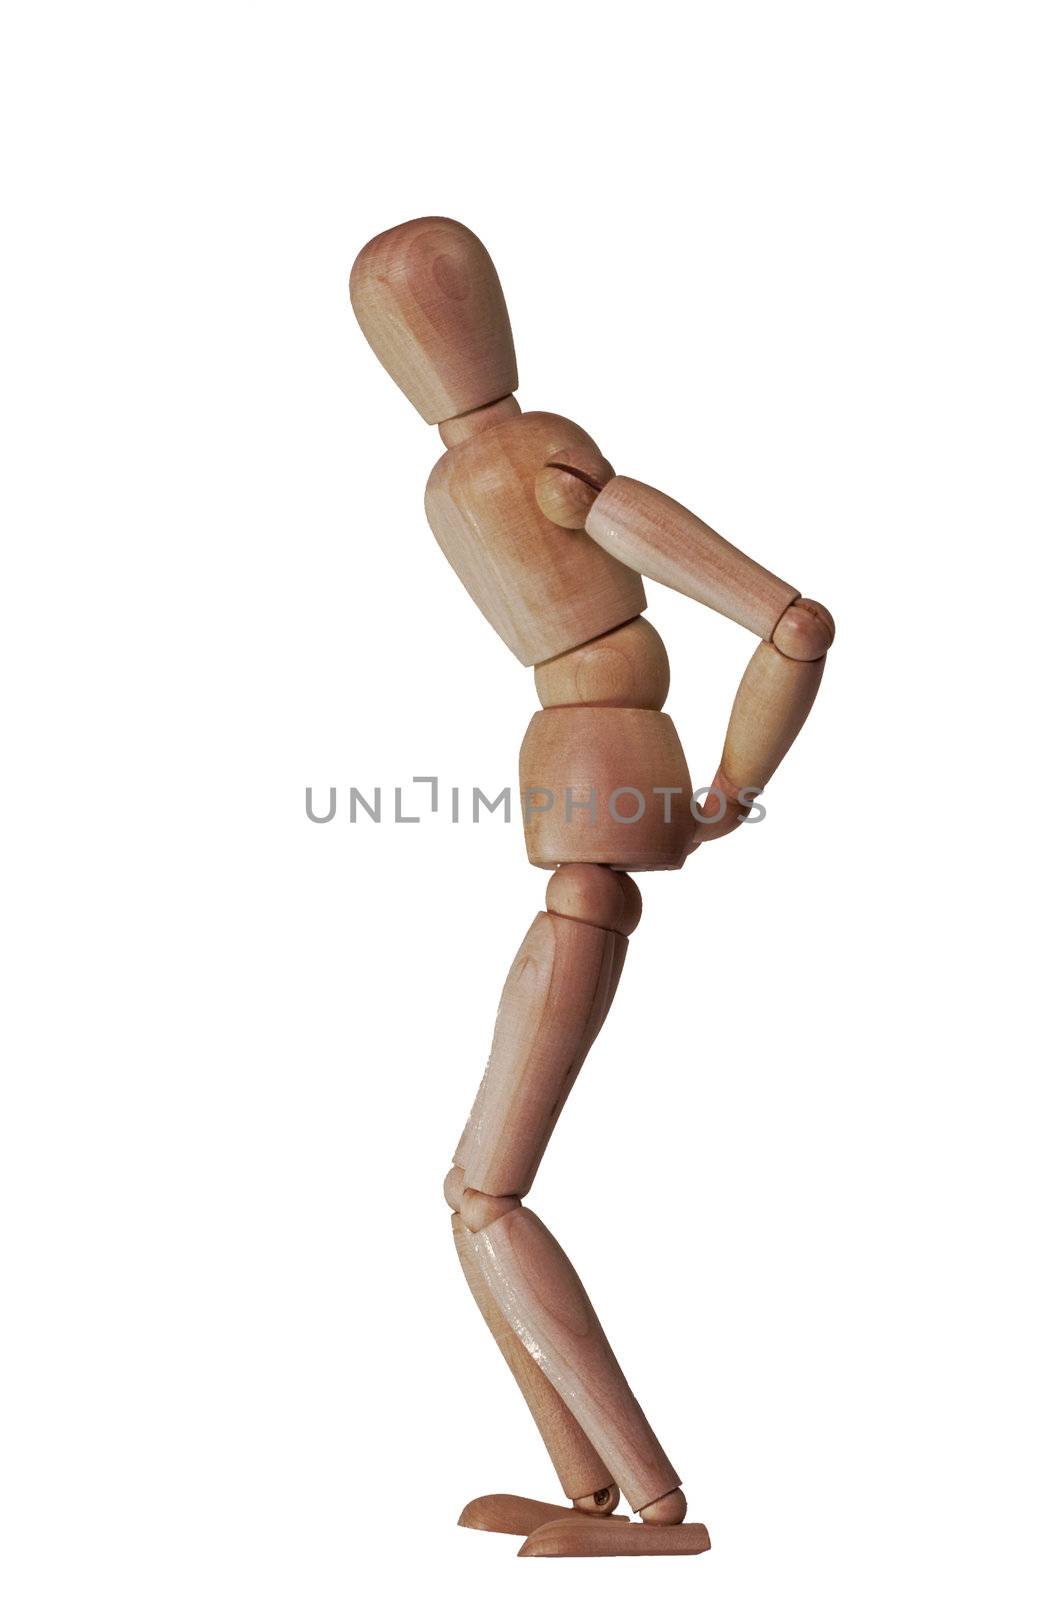 Wooden puppet set as someone with a back pain. White background with no shadow.